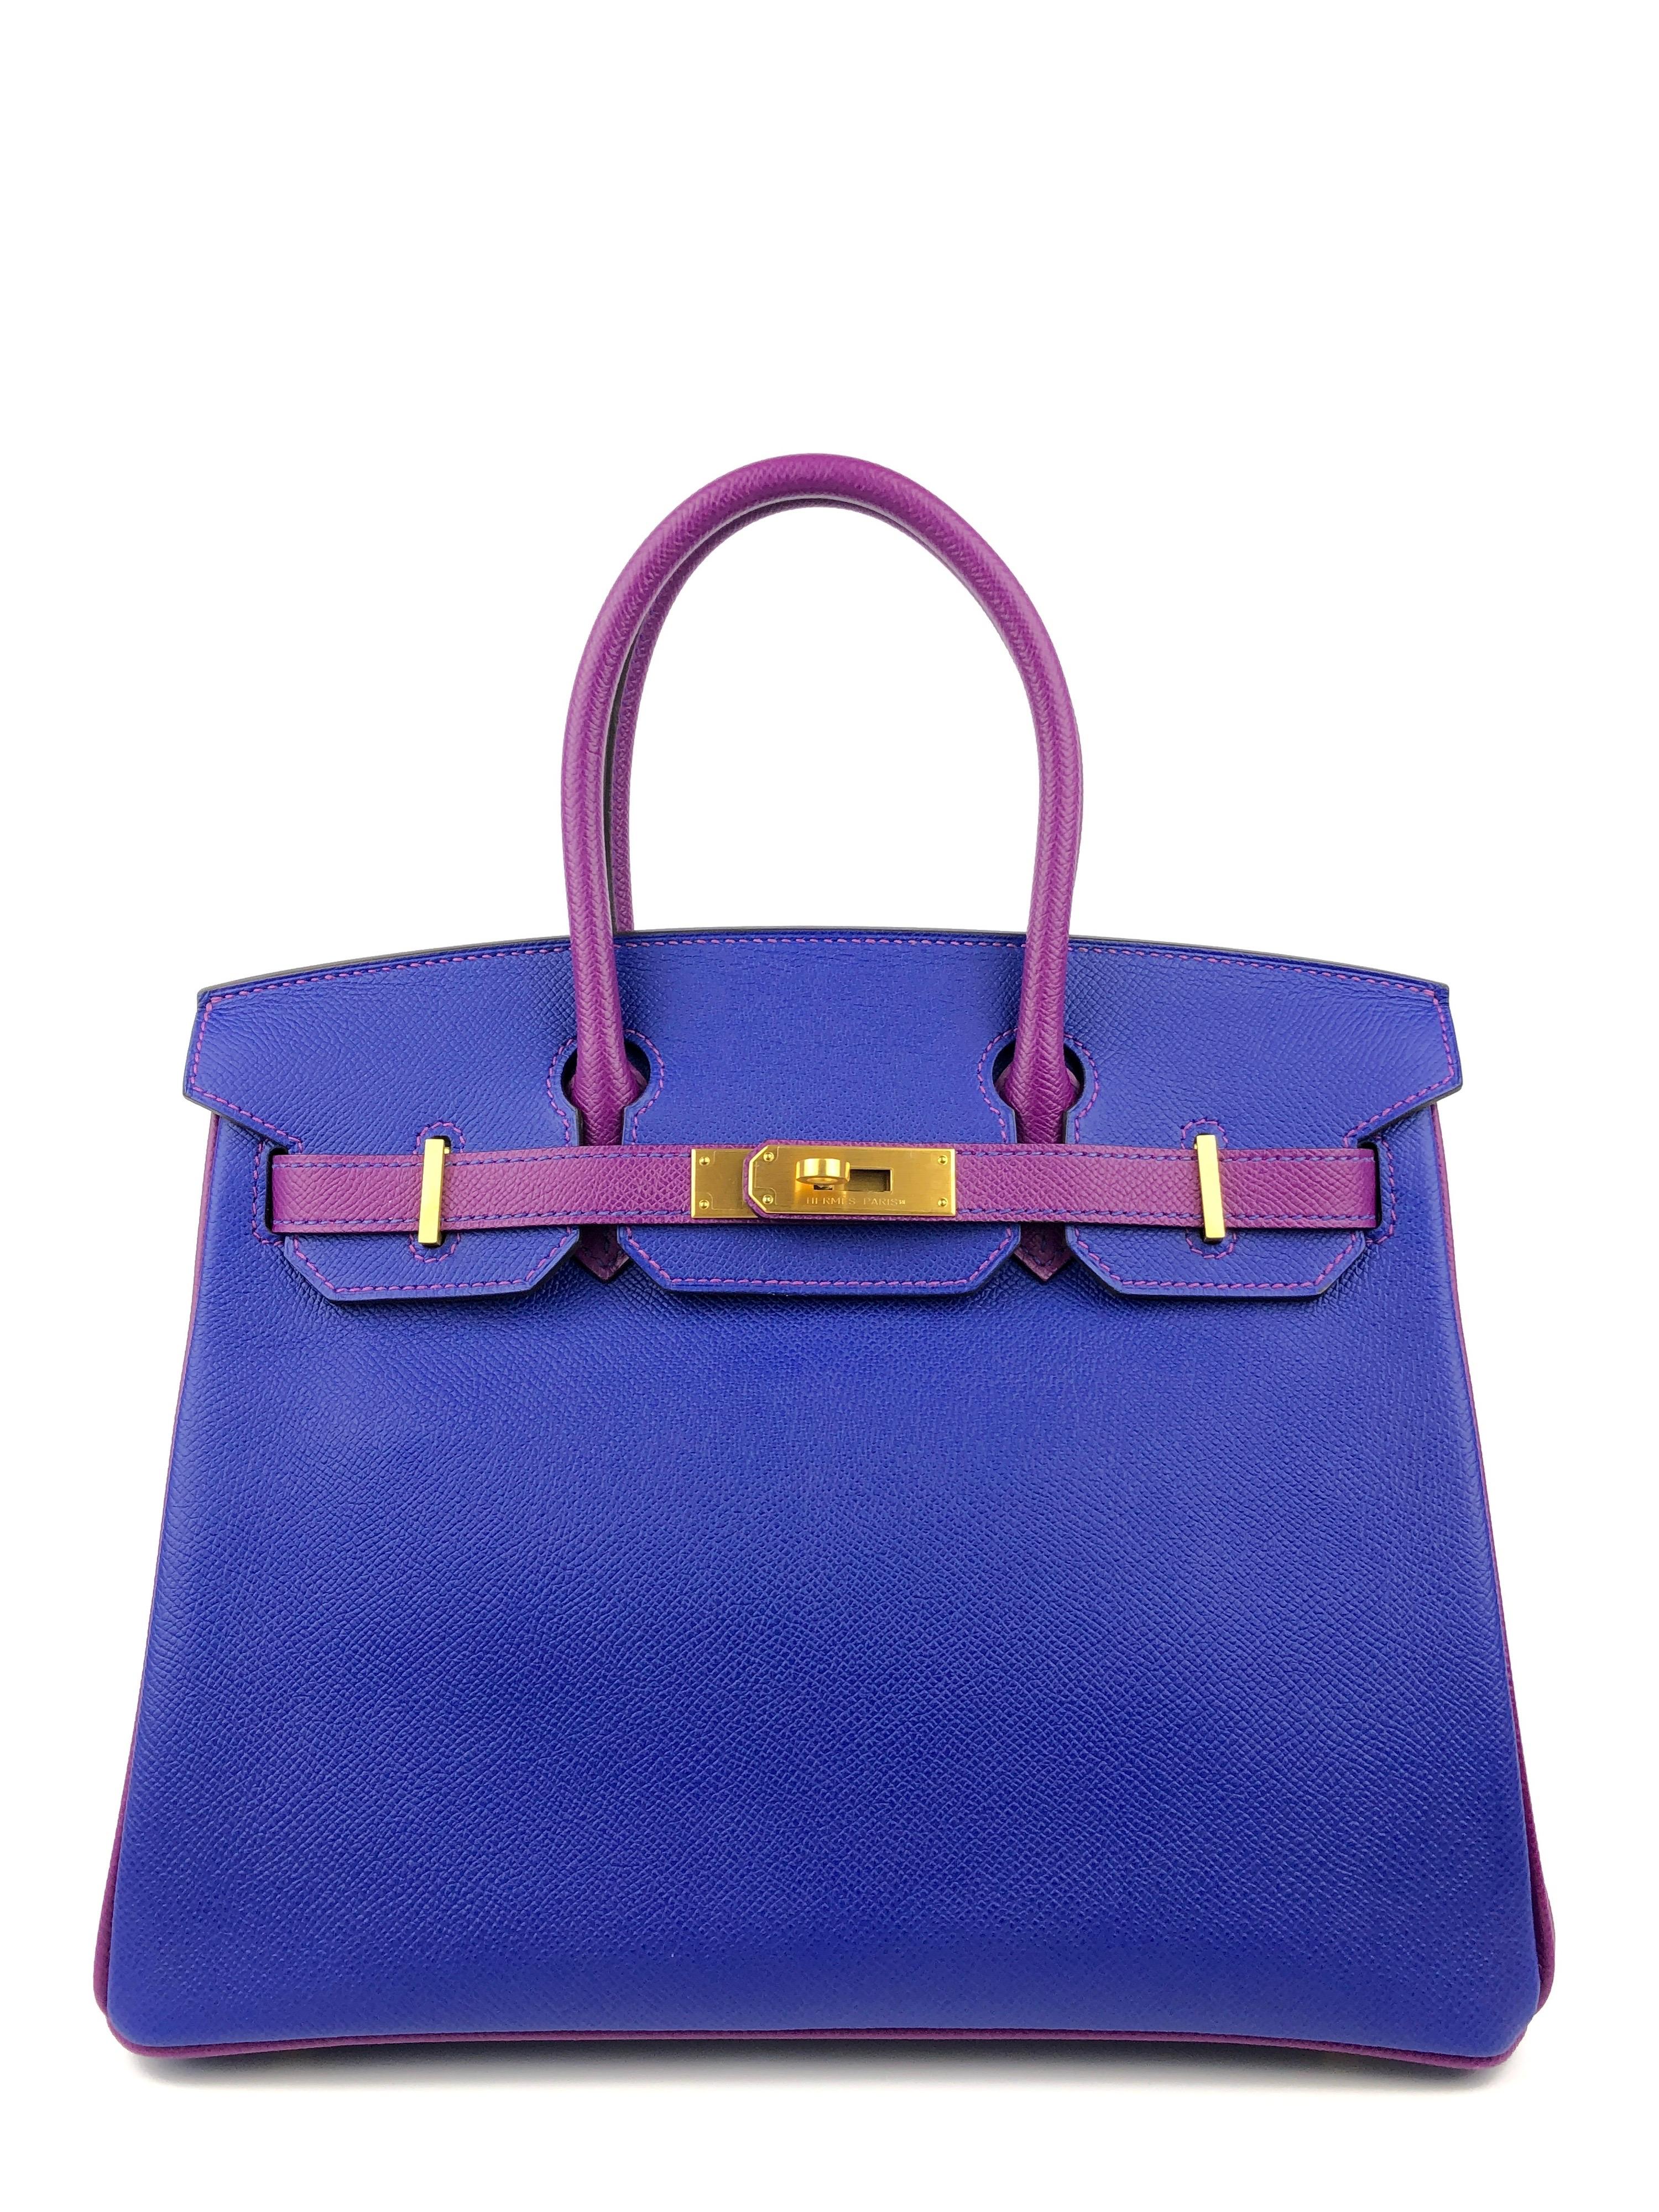 Like New Rare Hermes Birkin 30 HSS Special Order Blue Electric Anemone Purple Epsom Leather Brushed Gold Hardware. 

Shop with Confidence from Lux Addicts. Authenticity Guaranteed! 